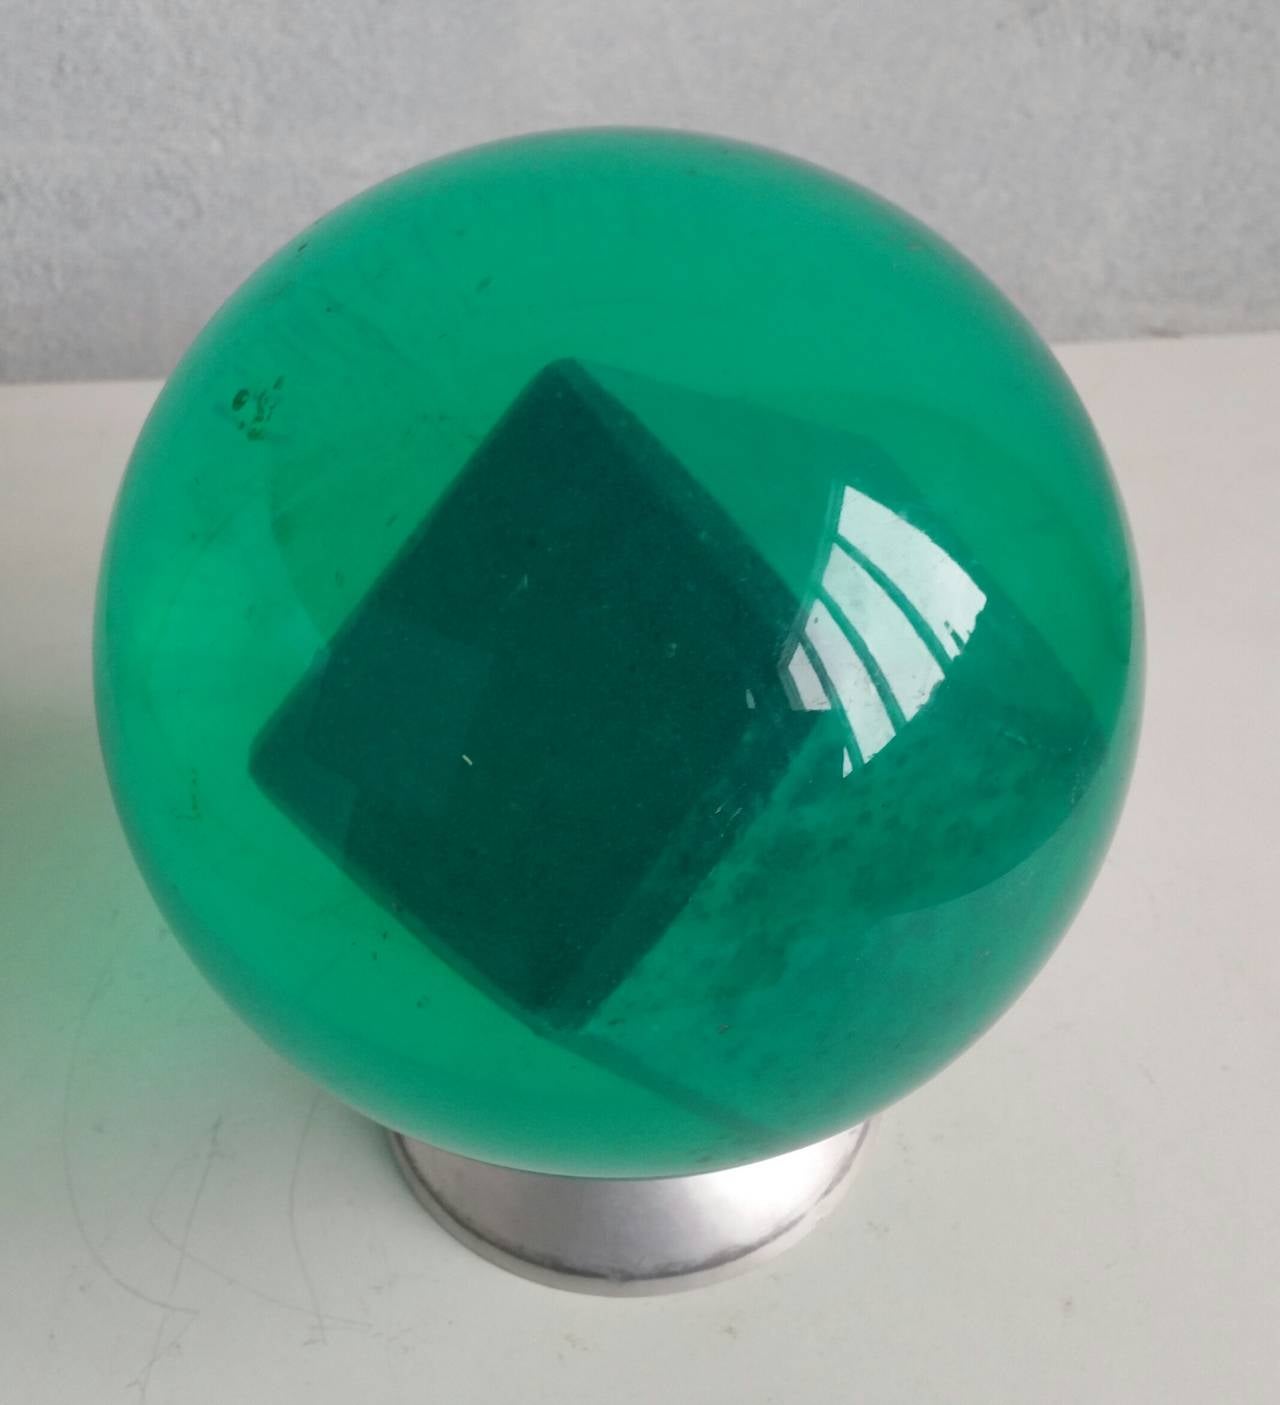 Unusual acrylic bowling ball, great little Mid-Century Modern object, finger holes never drilled, floating Styrofoam cube inside. Aluminum stand not included.